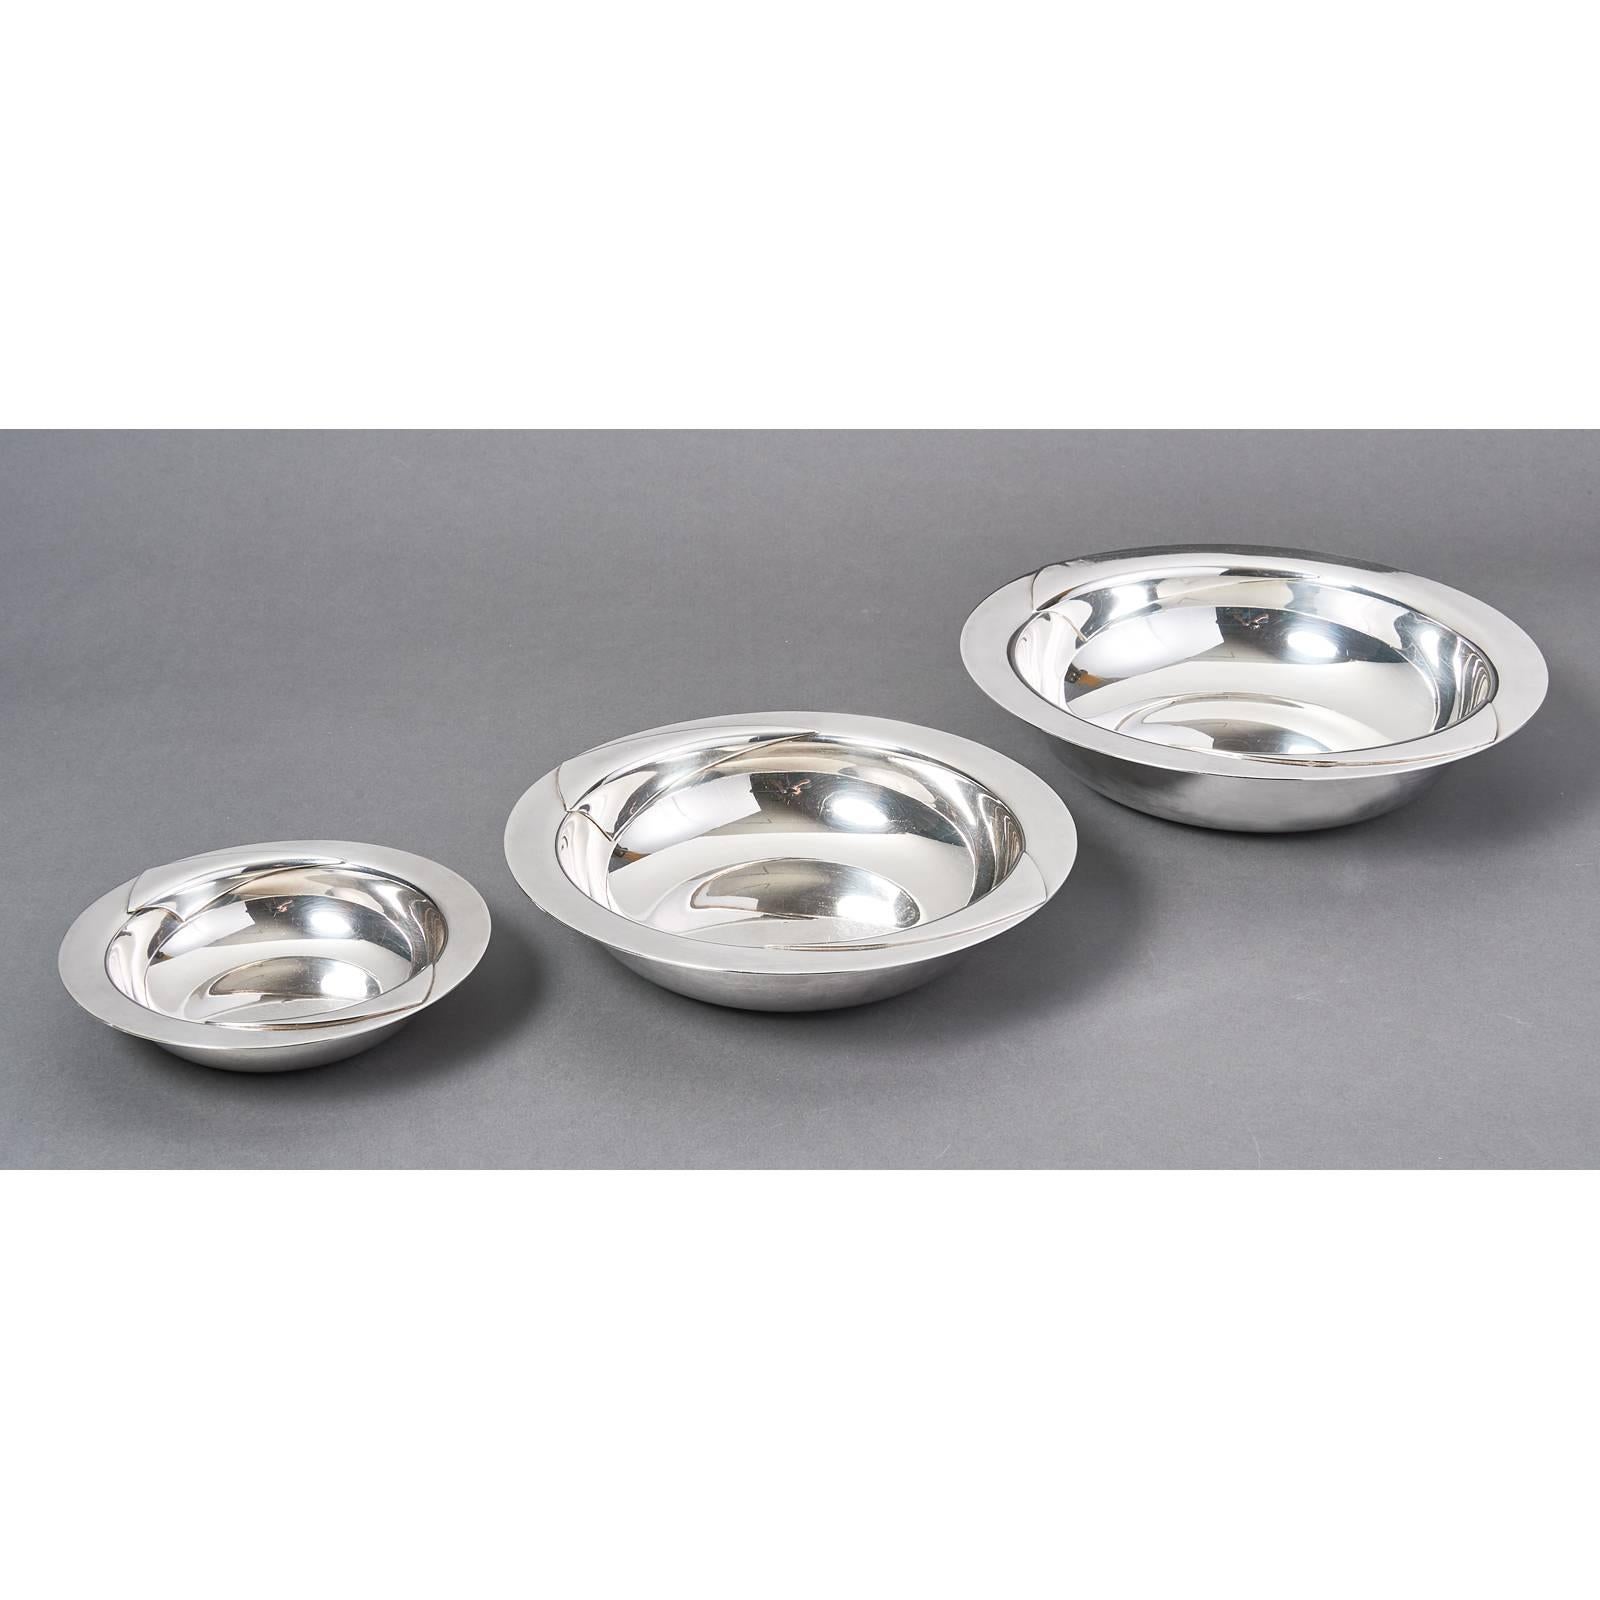 Lino Sabbatini ( 1925-2016 )
A rare set of three graduated round silvered bowls with decorated rim.
Signed
Italy, 1970's
Dimensions: Large: 12.5 Ø, medium: 10.75 Ø, small: 7.5 Ø.